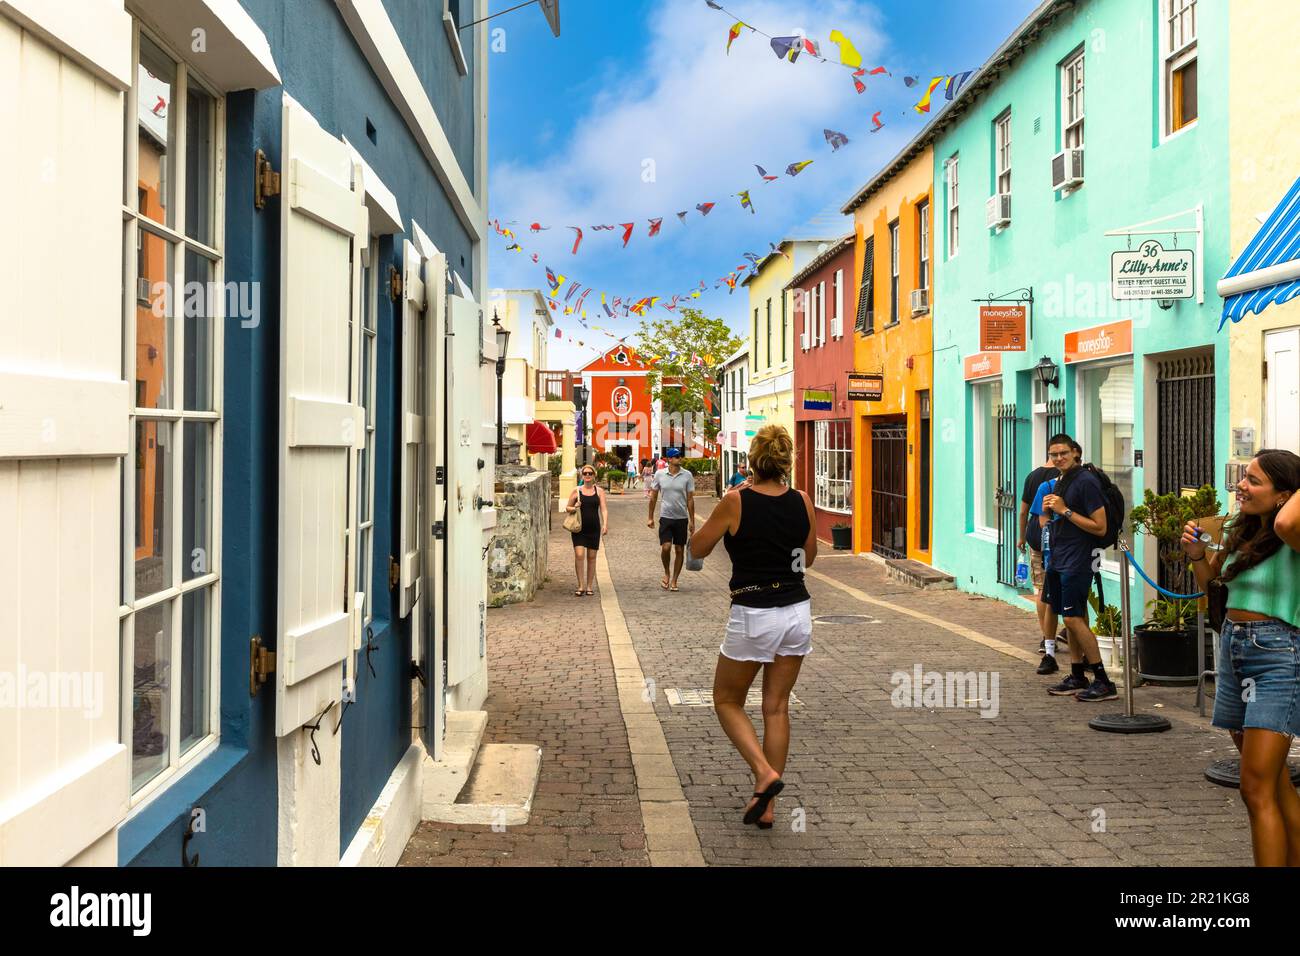 Visitors stroll a main shopping street in St. George, Bermuda Stock Photo